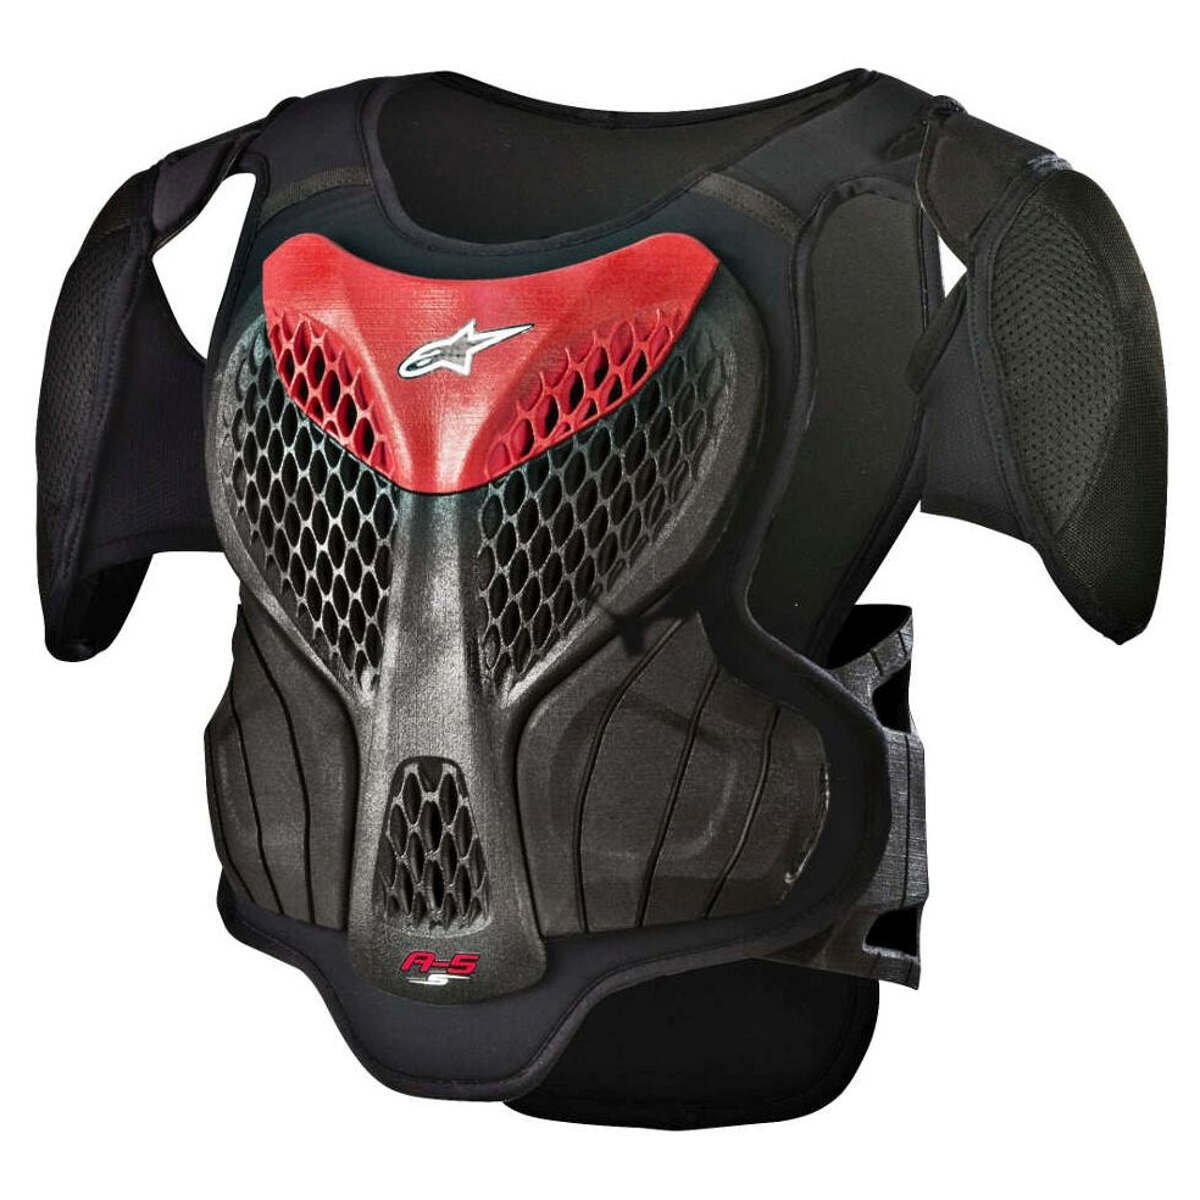 Alpinestars Kids Chest Protector A-5 S Black/Red